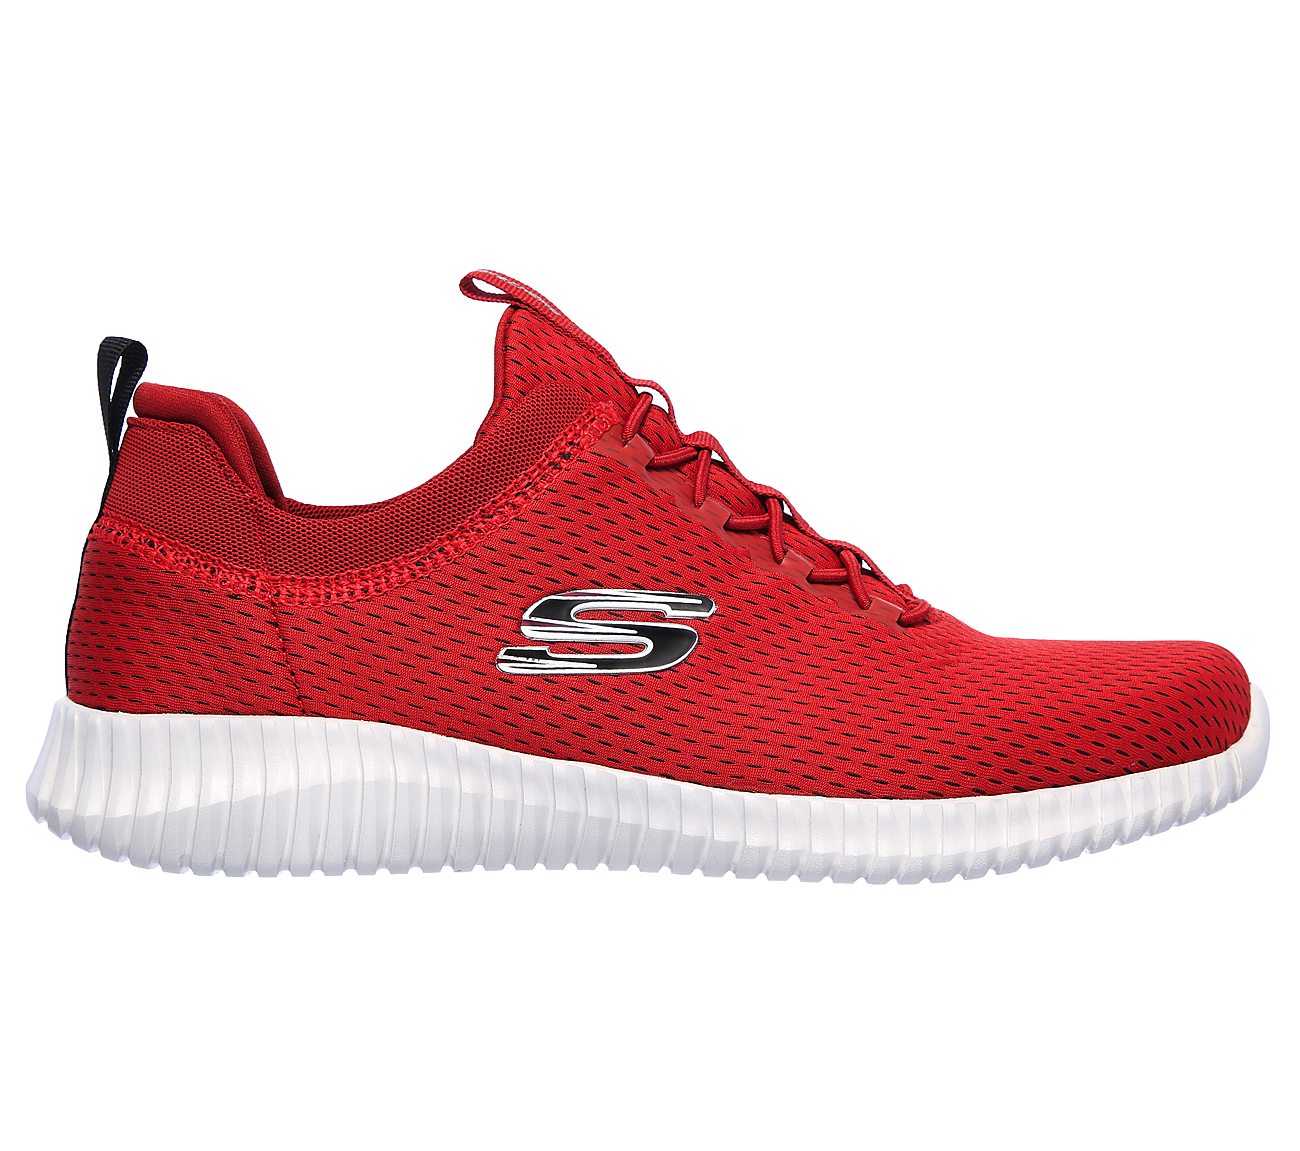 skechers boots red